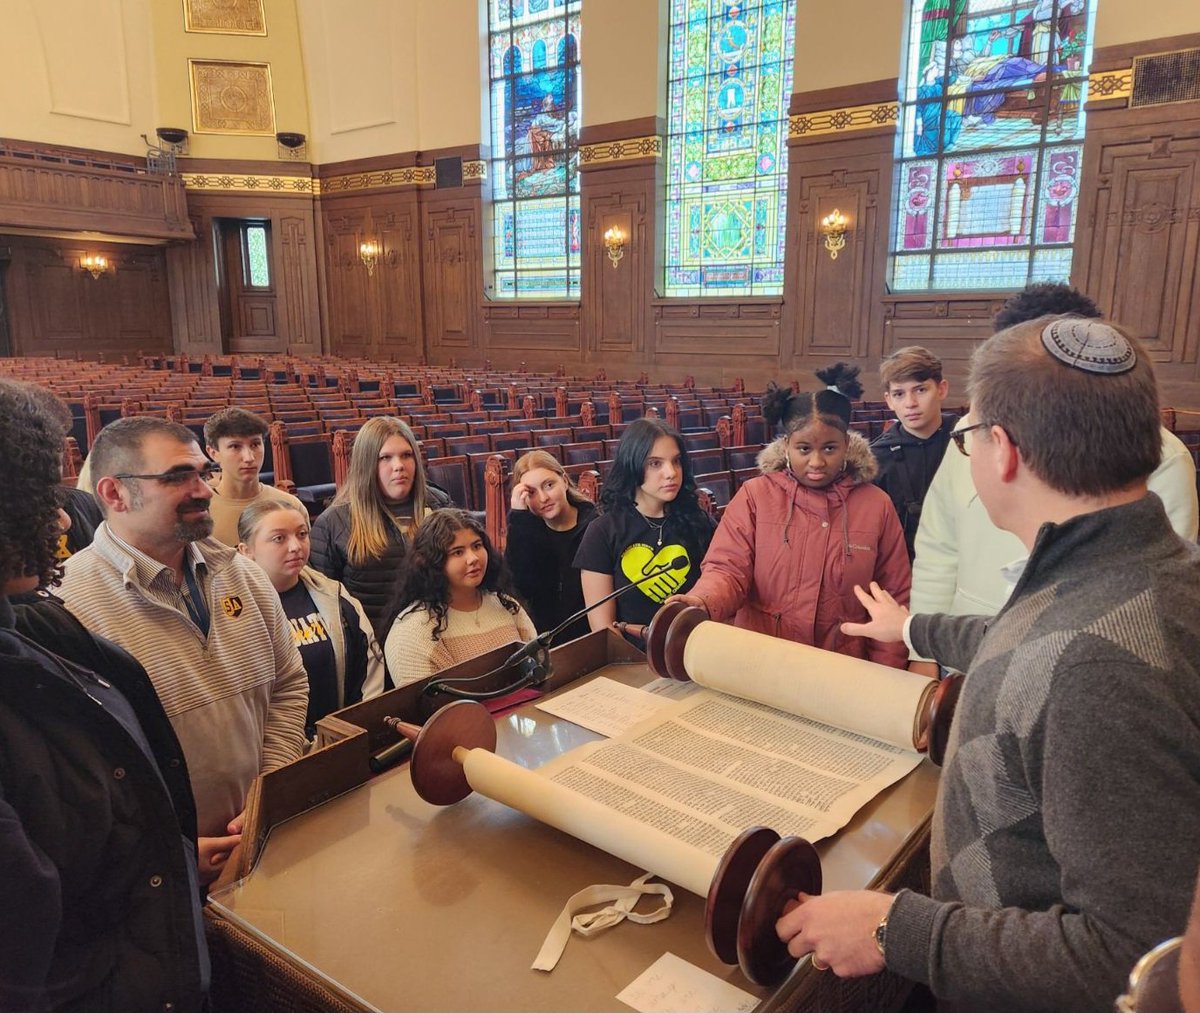 Learning with each other this Holiday season--Principal @ChuckMichael98 joined students in SA's Eradicate Hate club in an educational experience first at Rodef Shalom organized by @CWBPgh, and then at The Tree of Life for a special Remembrance ceremony organized by @LIGHT_init.